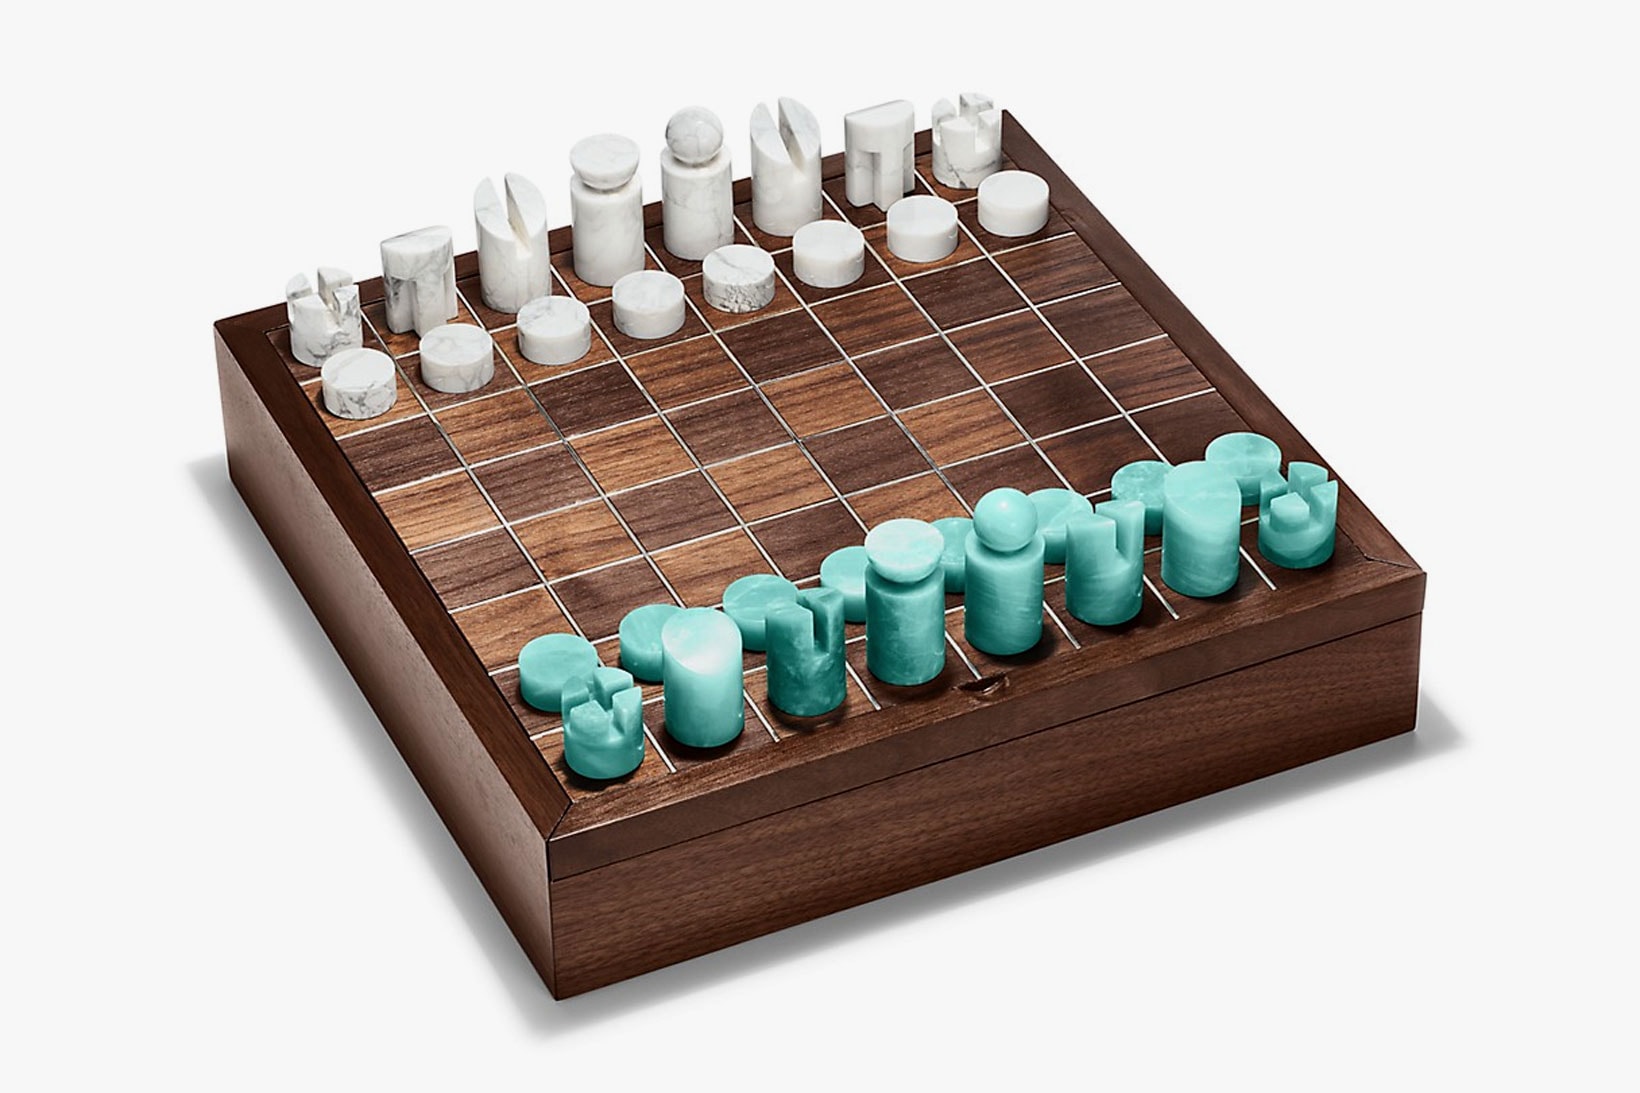 tiffany and co mahjong chess checkers set price board games holiday christmas home accessories luxury decor 